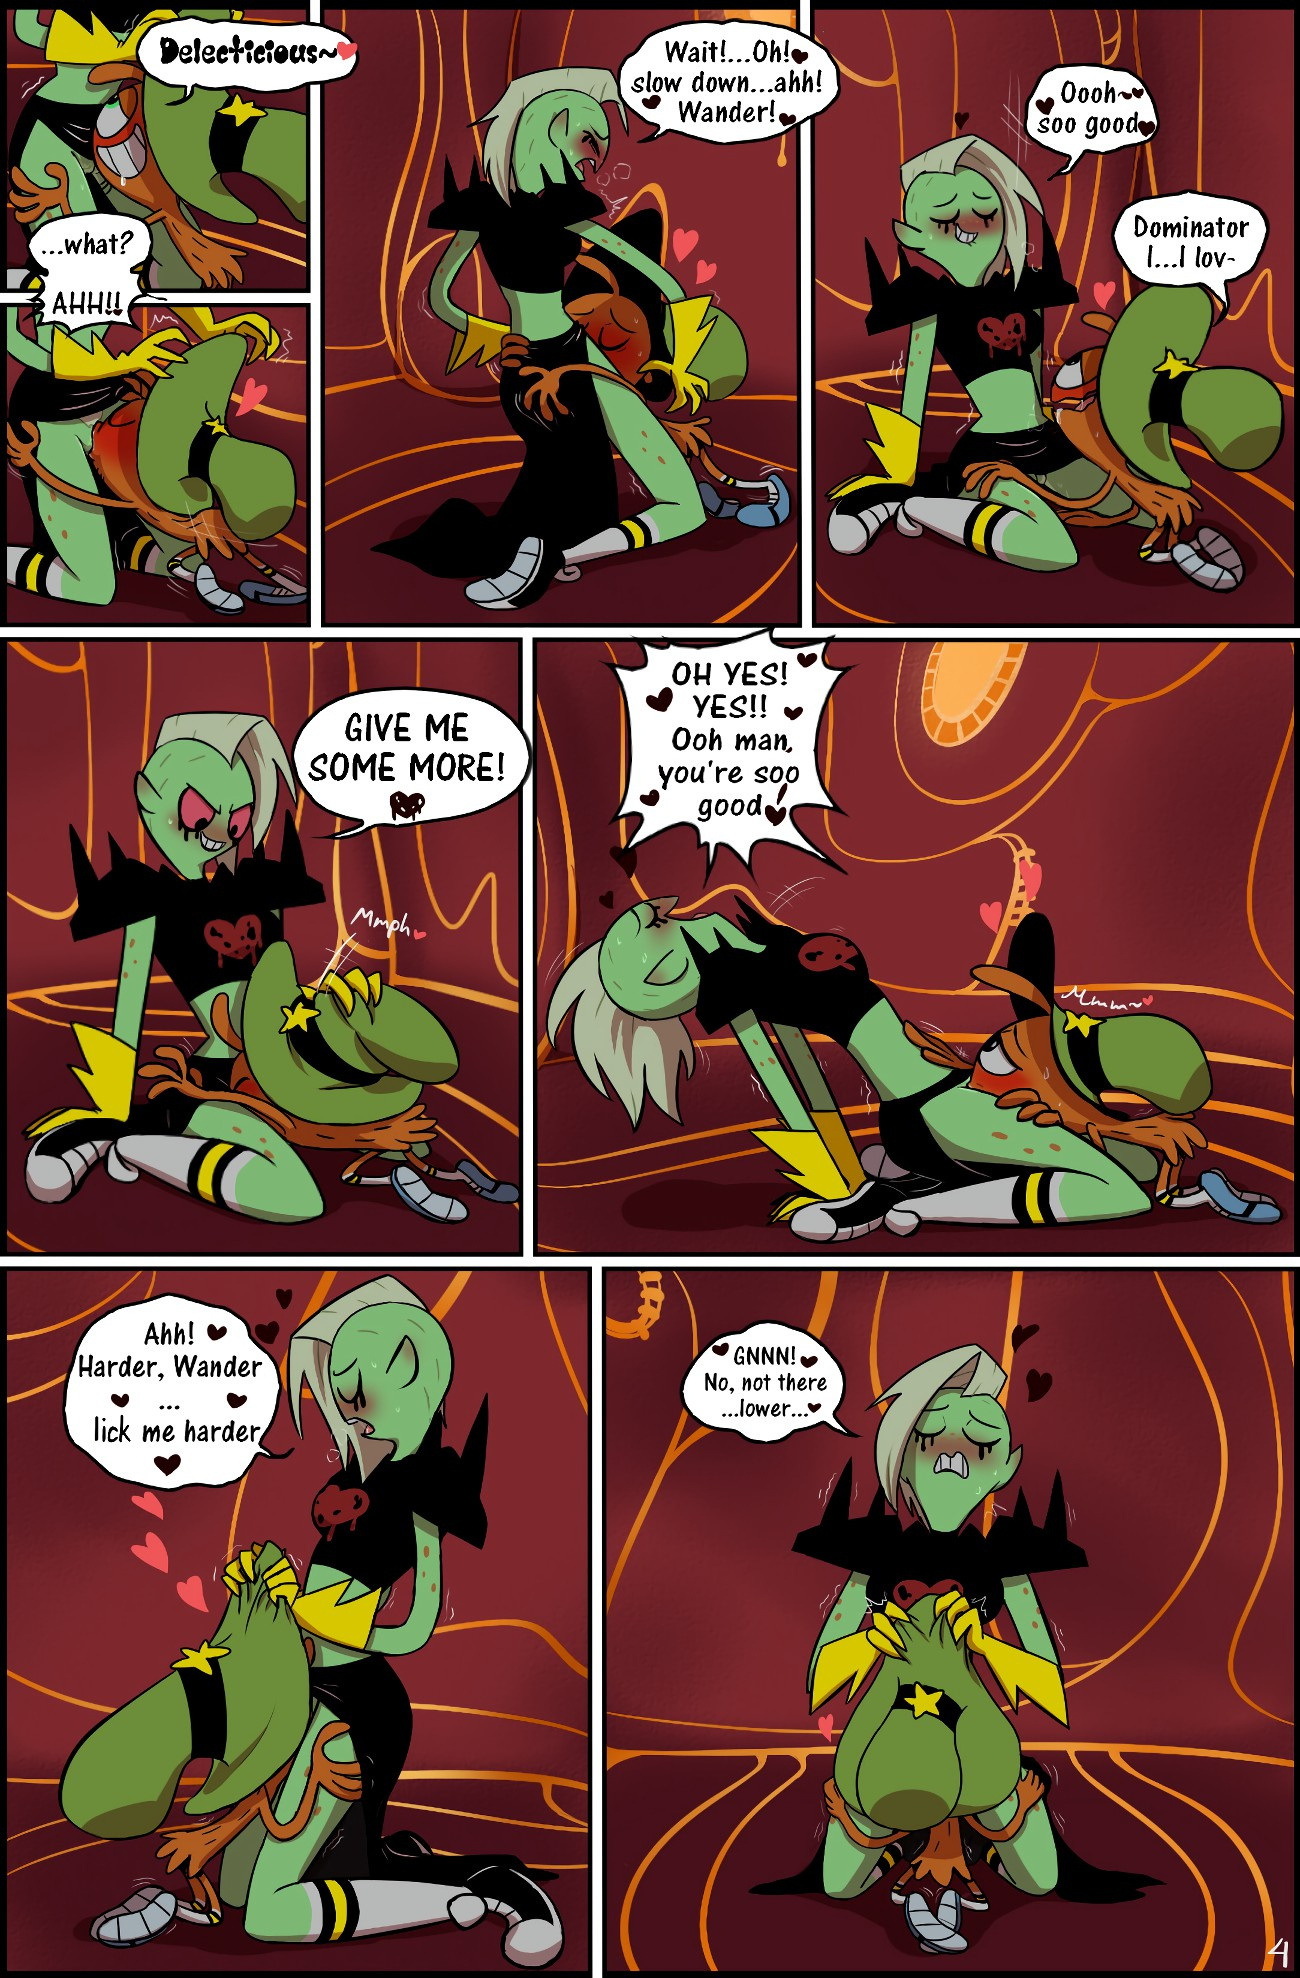 The Deal - Wander Over Yonder - Page 5